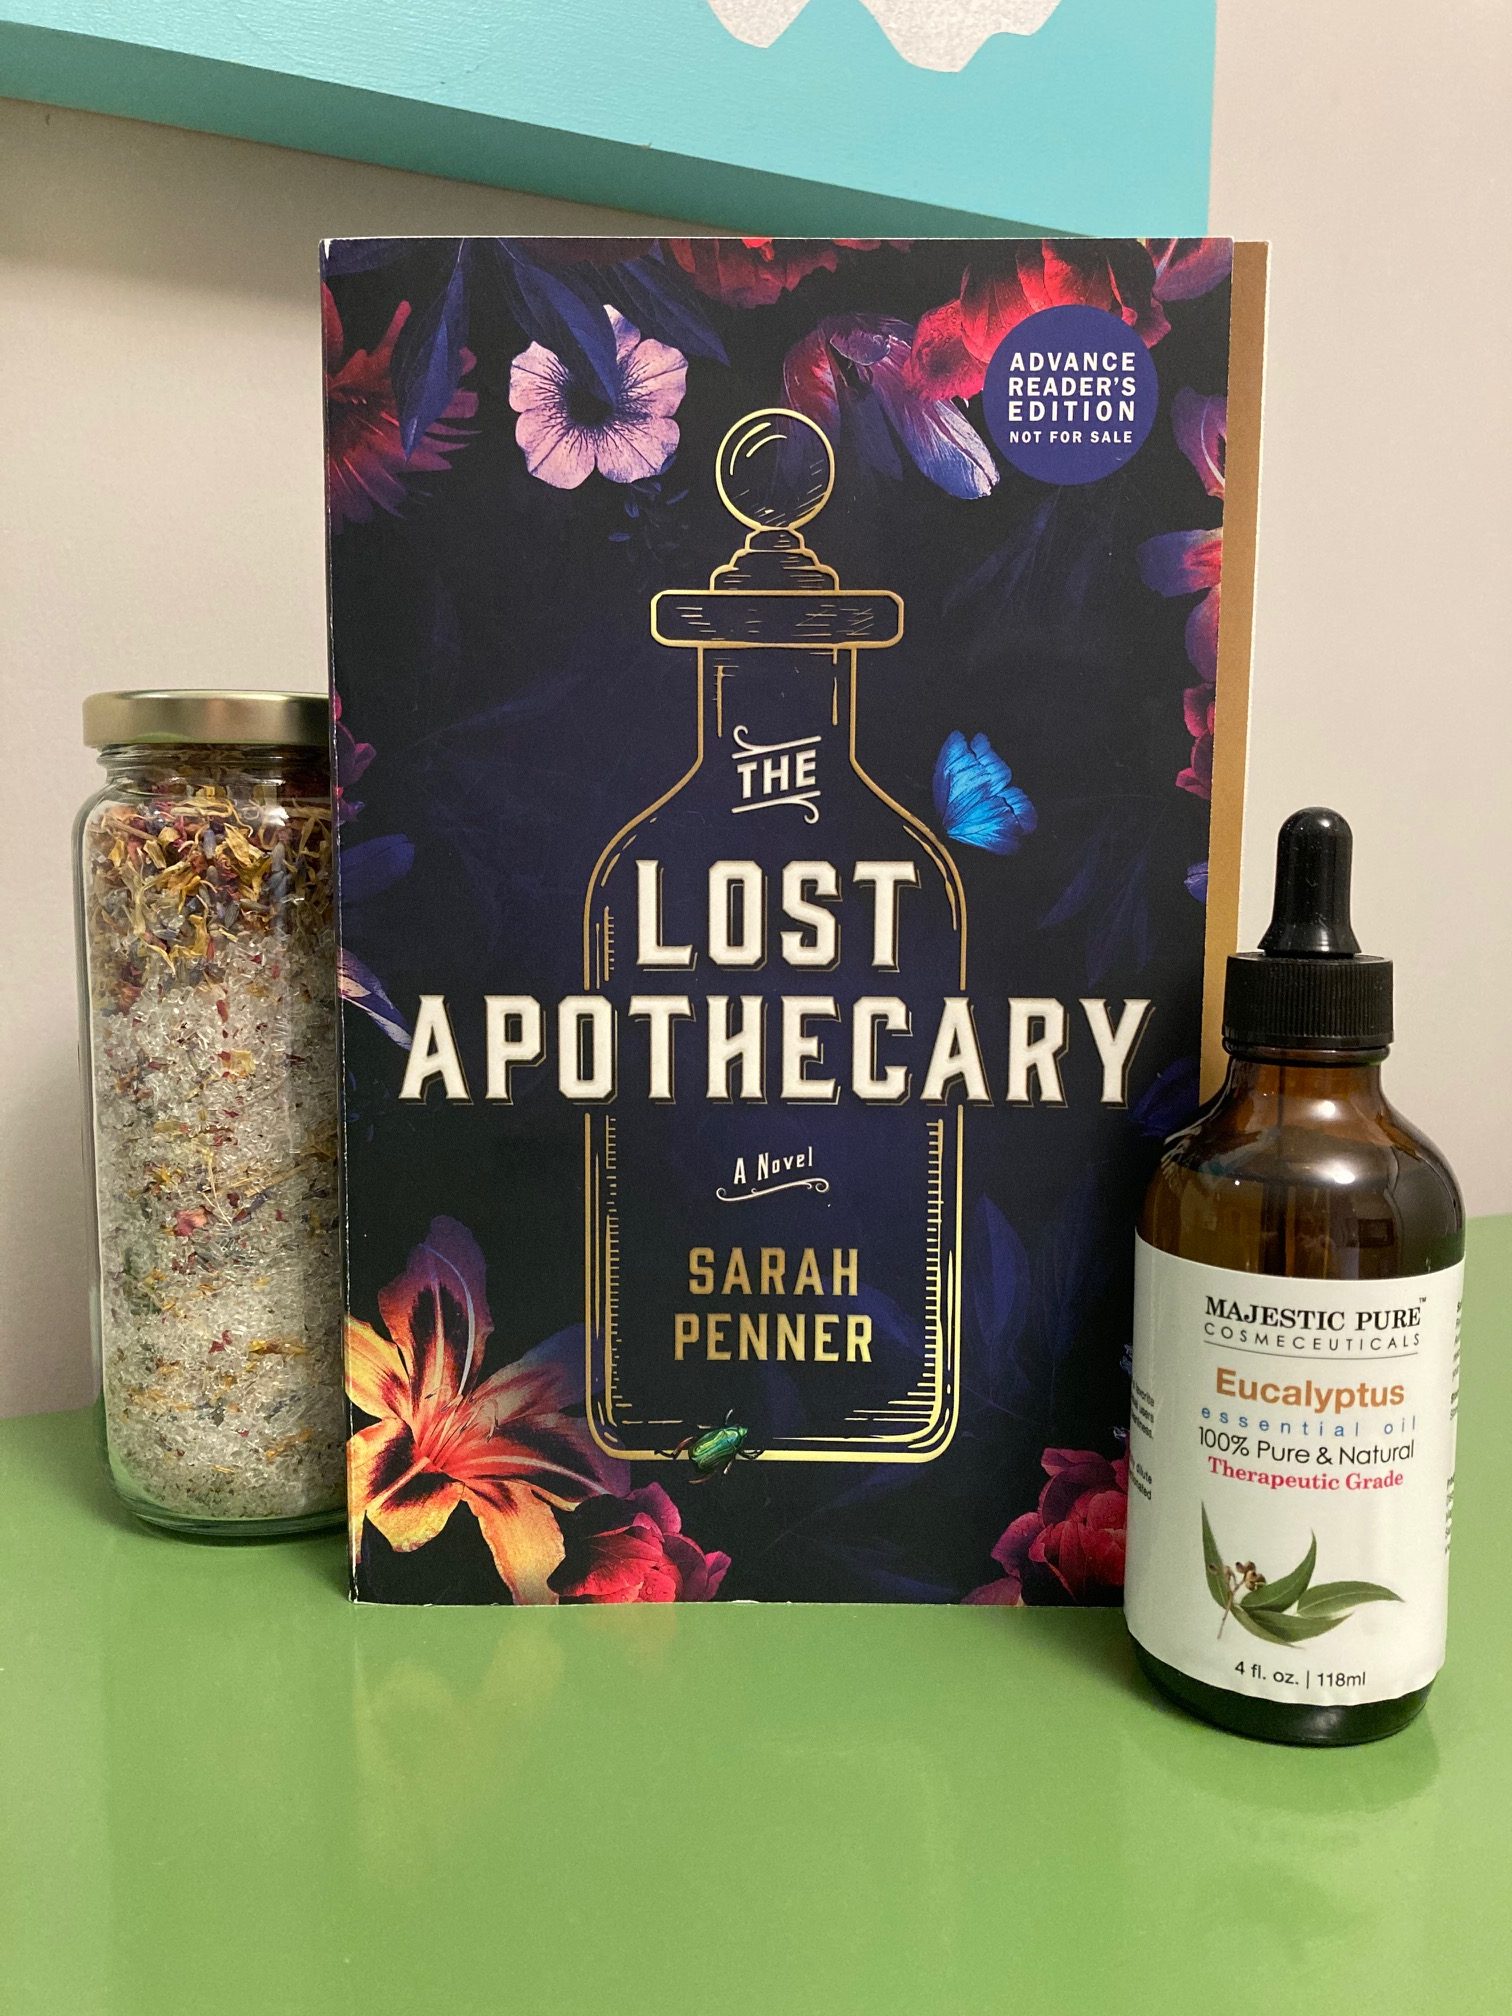 The Lost Apothecary by Sarah Penner cover image